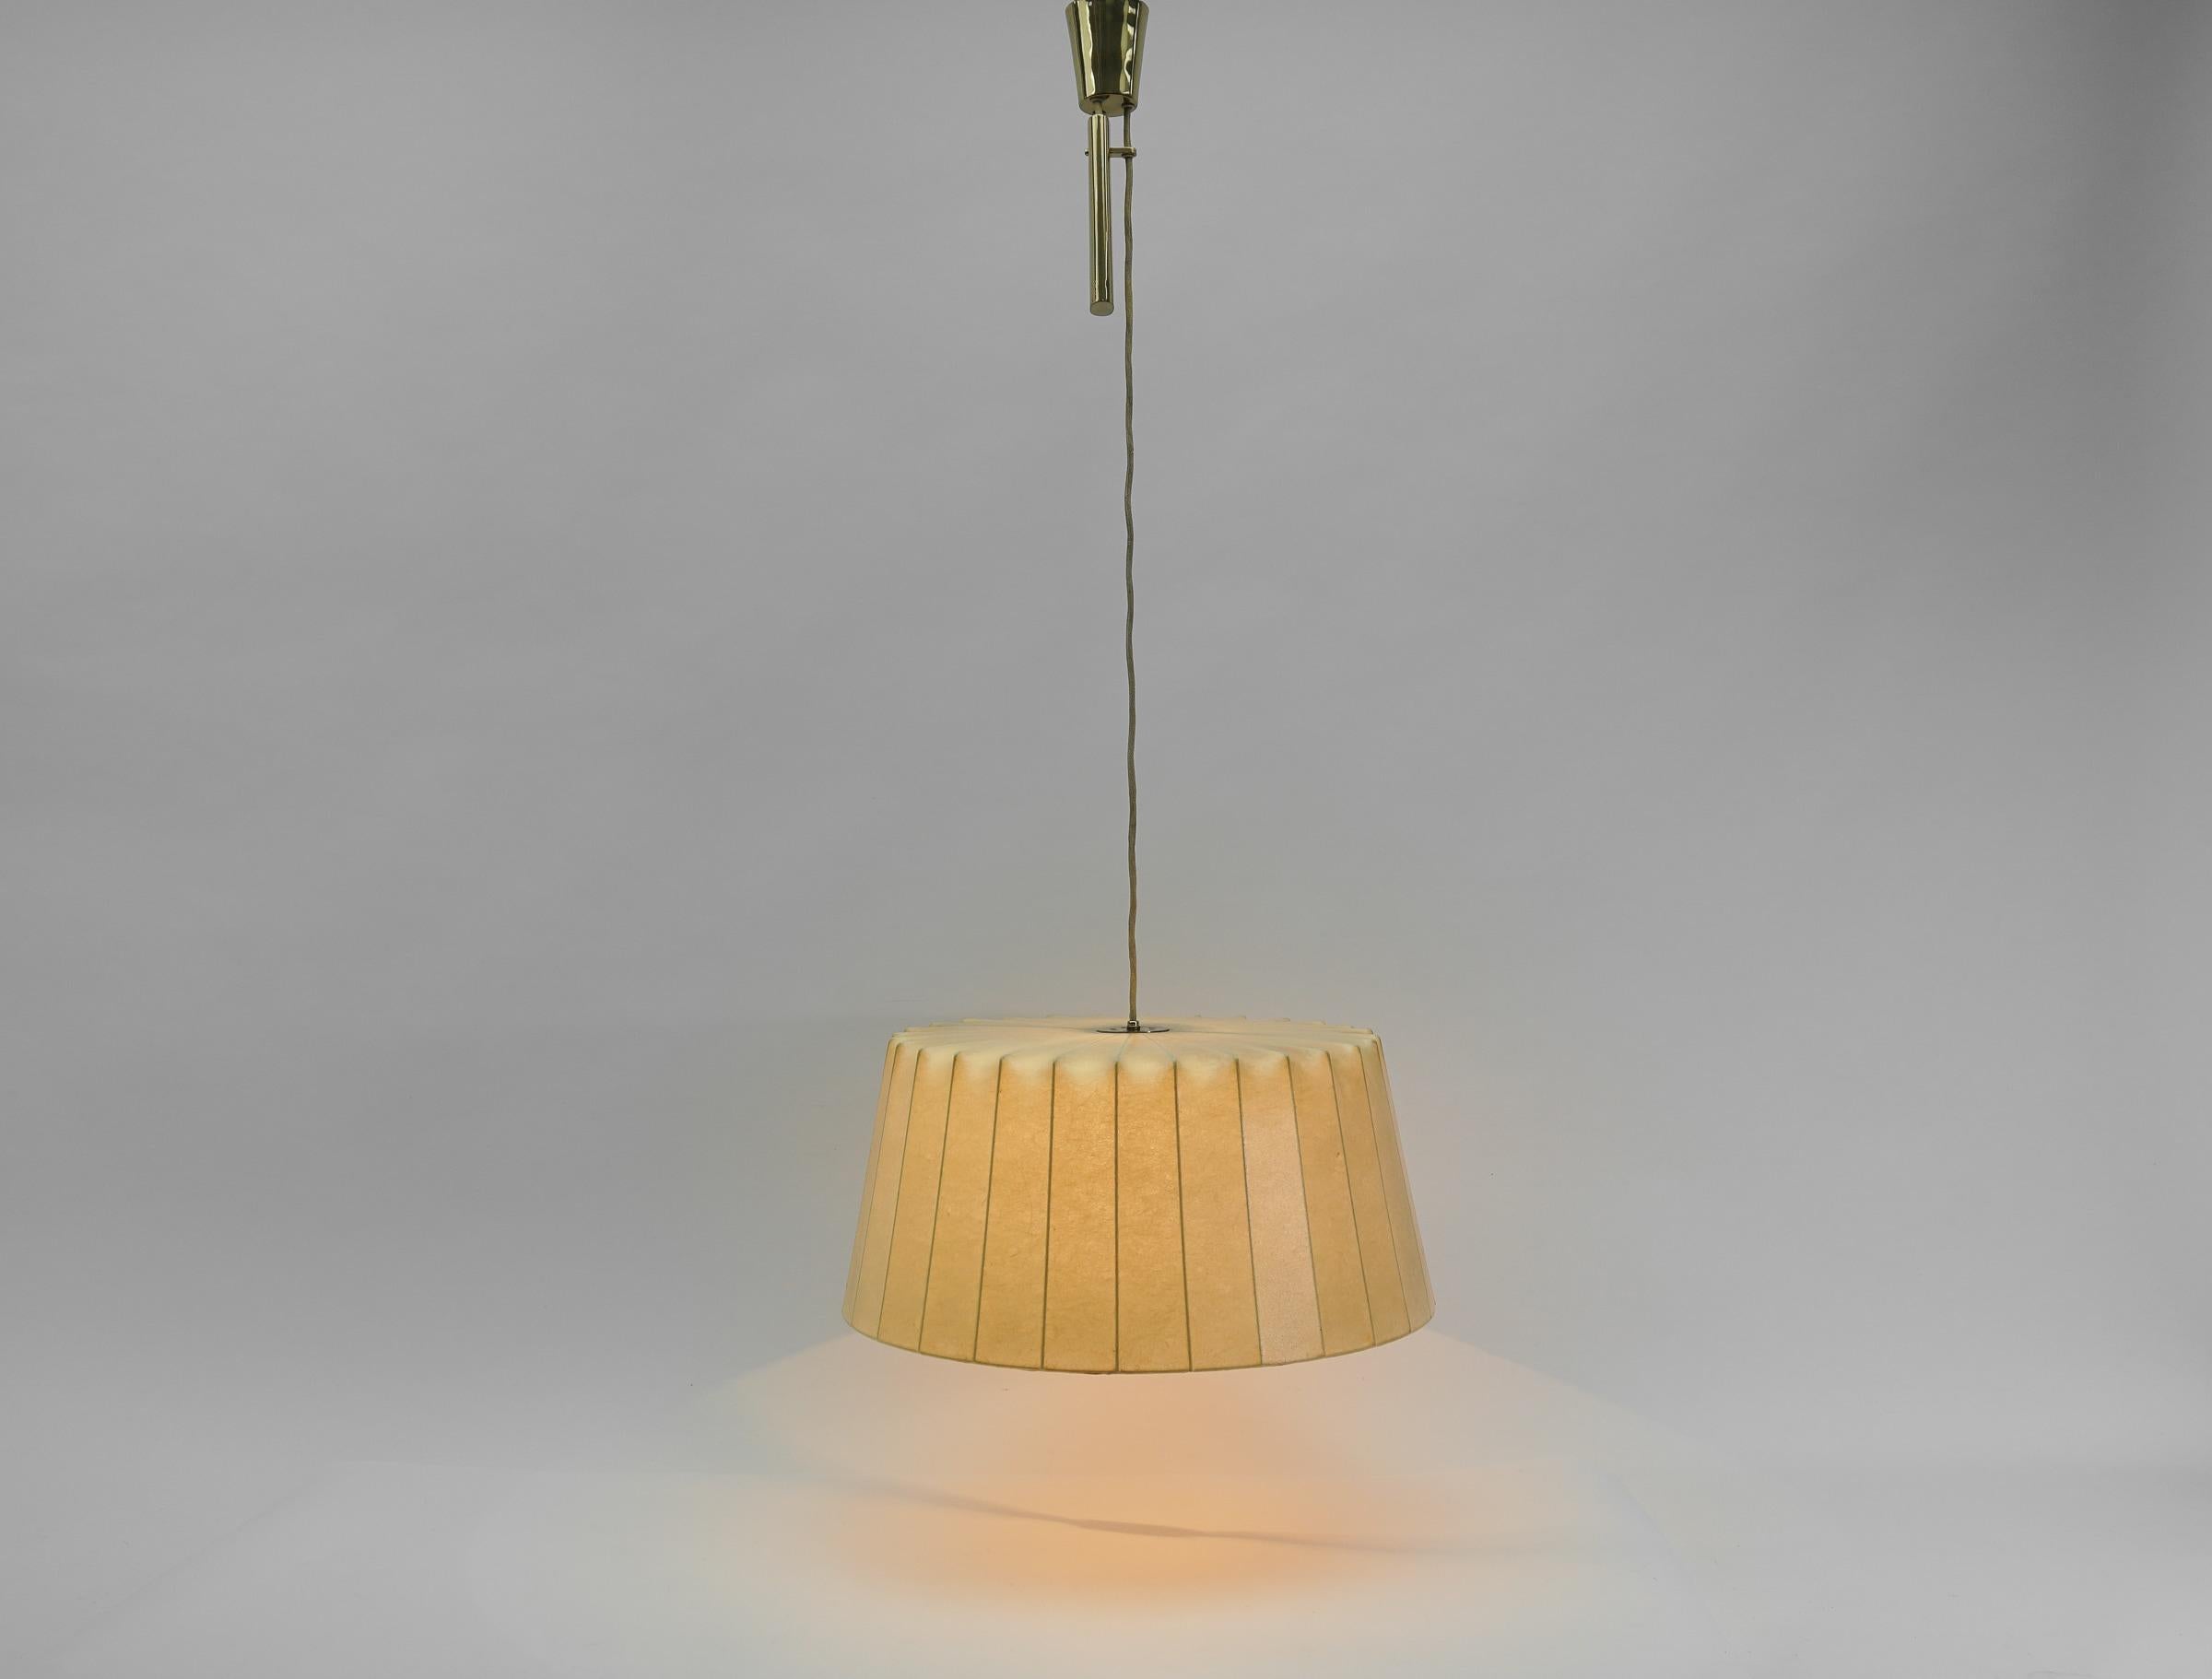 Mid-20th Century Lovely Cocoon Counterweight Hanging Lamp by Münchener Werkstätten, 1950s Germany For Sale